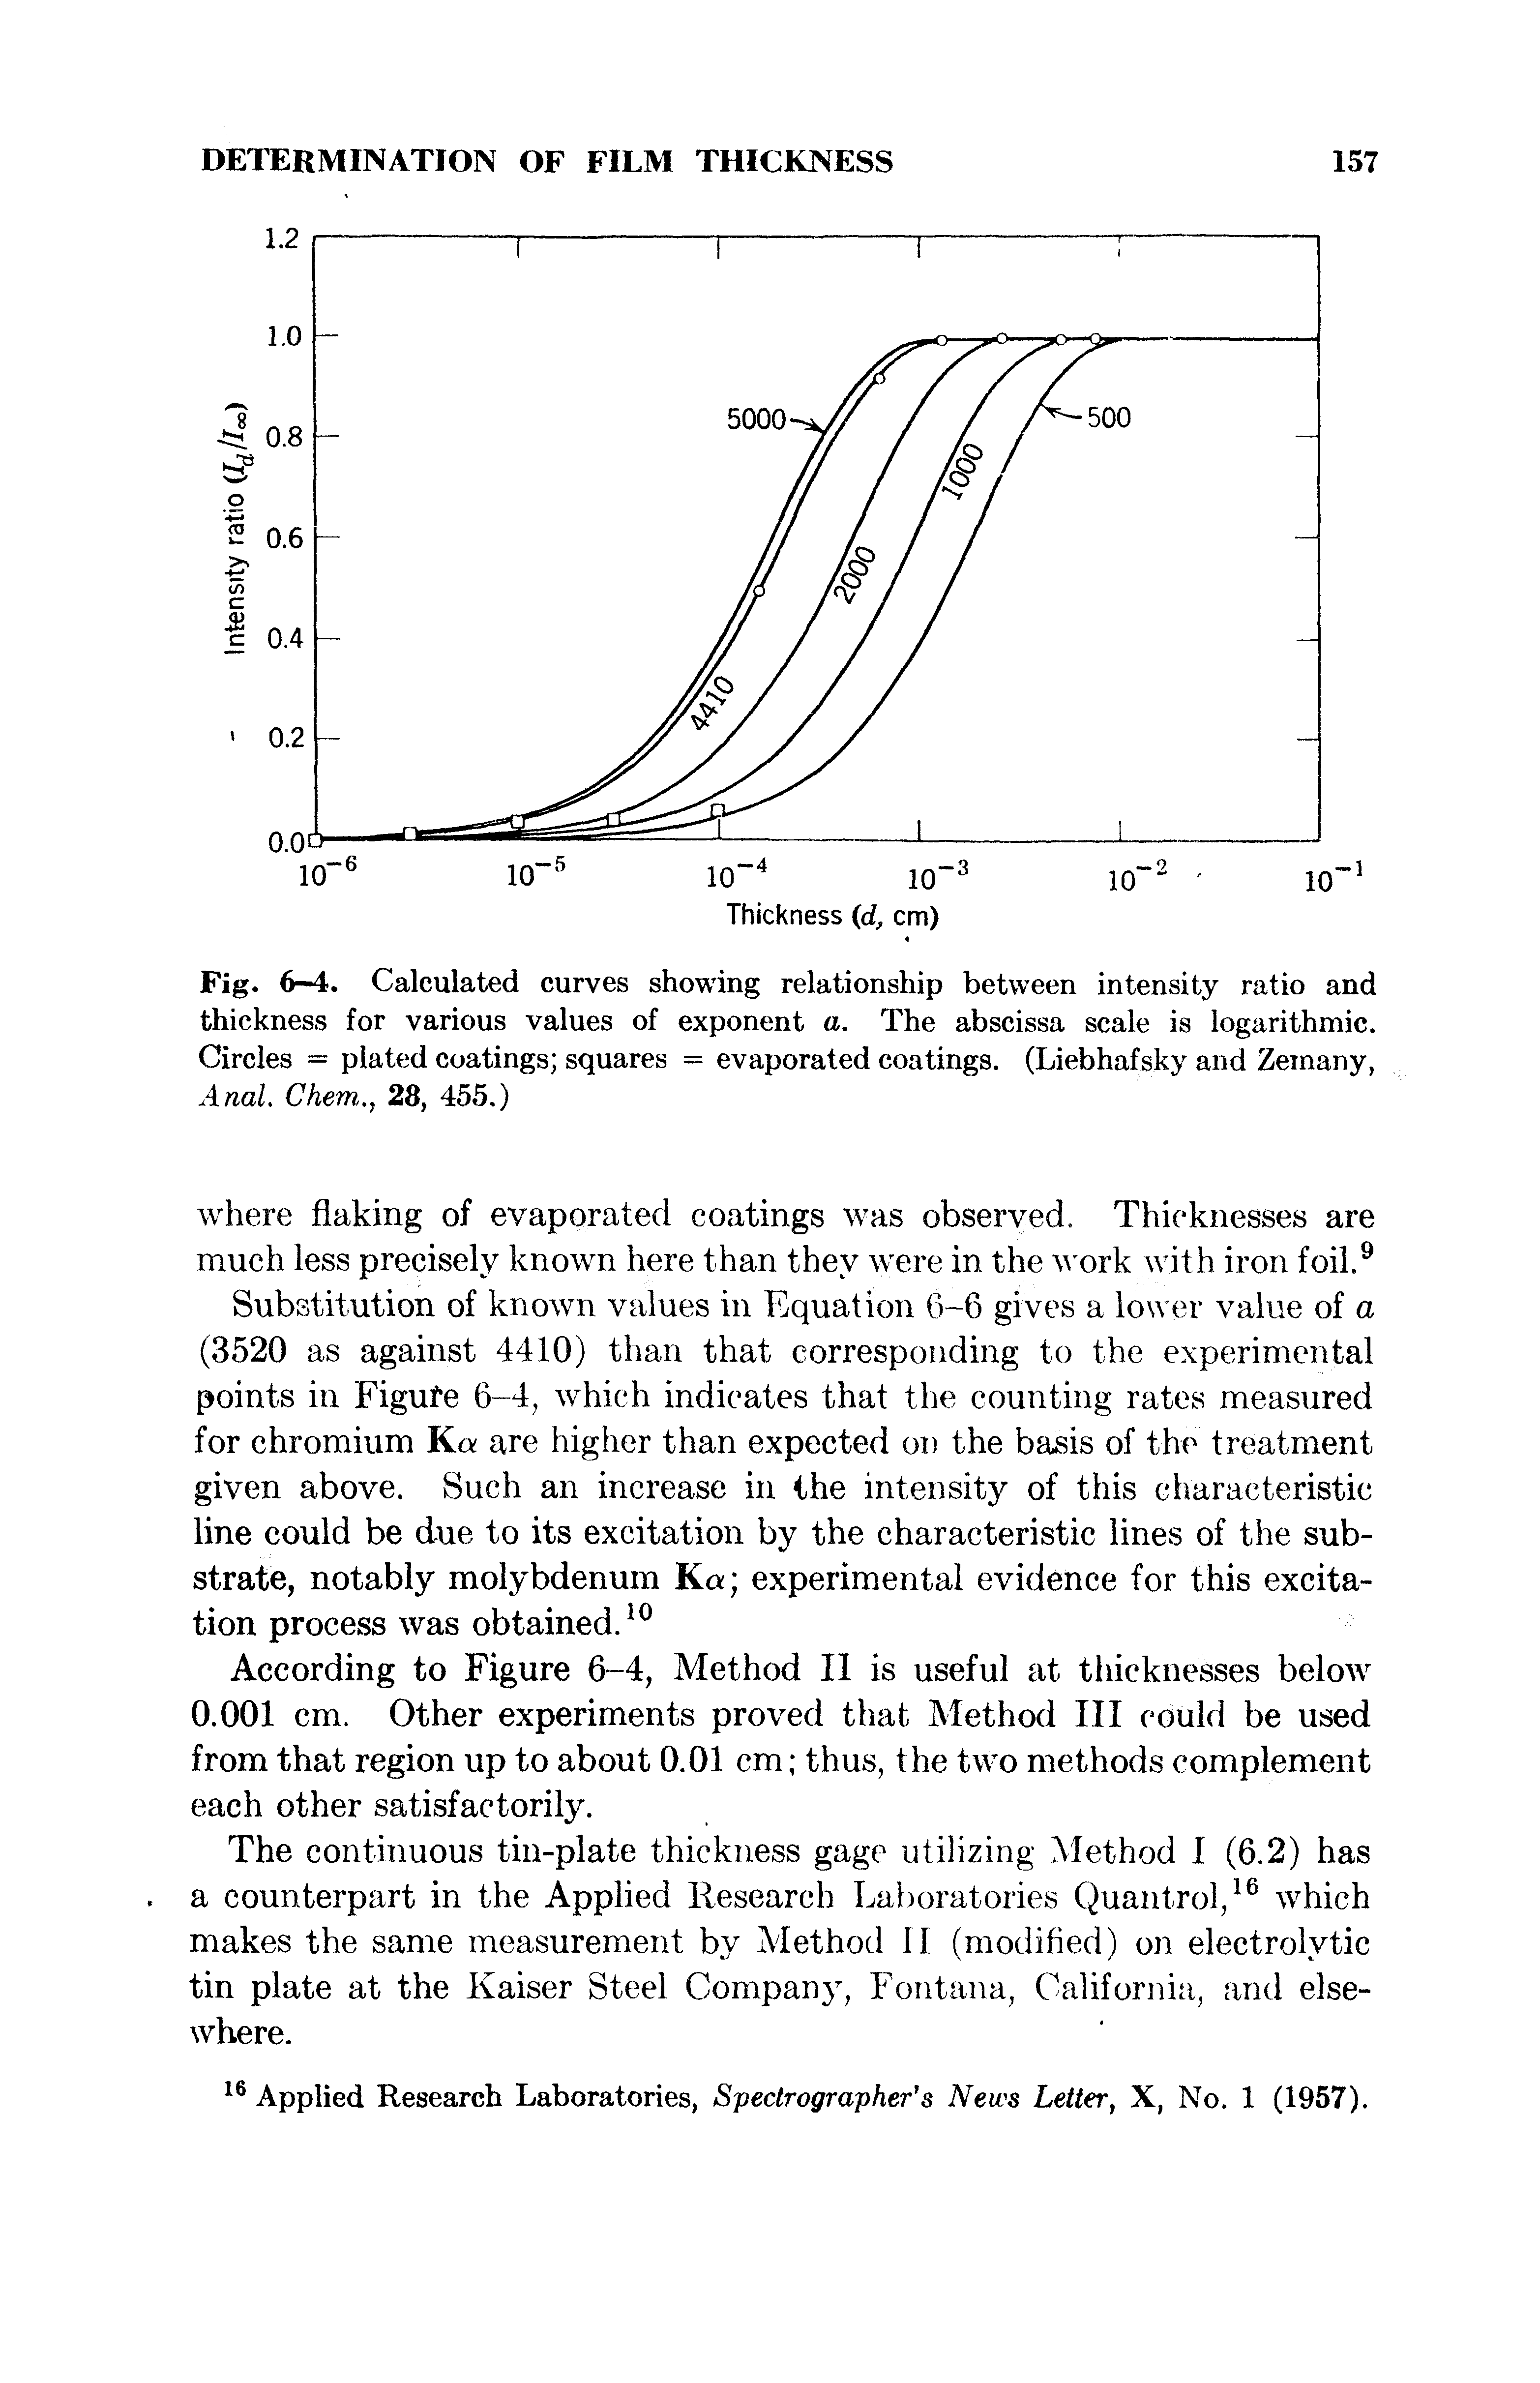 Fig. 6-4. Calculated curves showing relationship between intensity ratio and thickness for various values of exponent a. The abscissa scale is logarithmic. Circles = plated coatings squares = evaporated coatings. (Liebhafsky and Zemany, Anal. Chem., 28, 455.)...